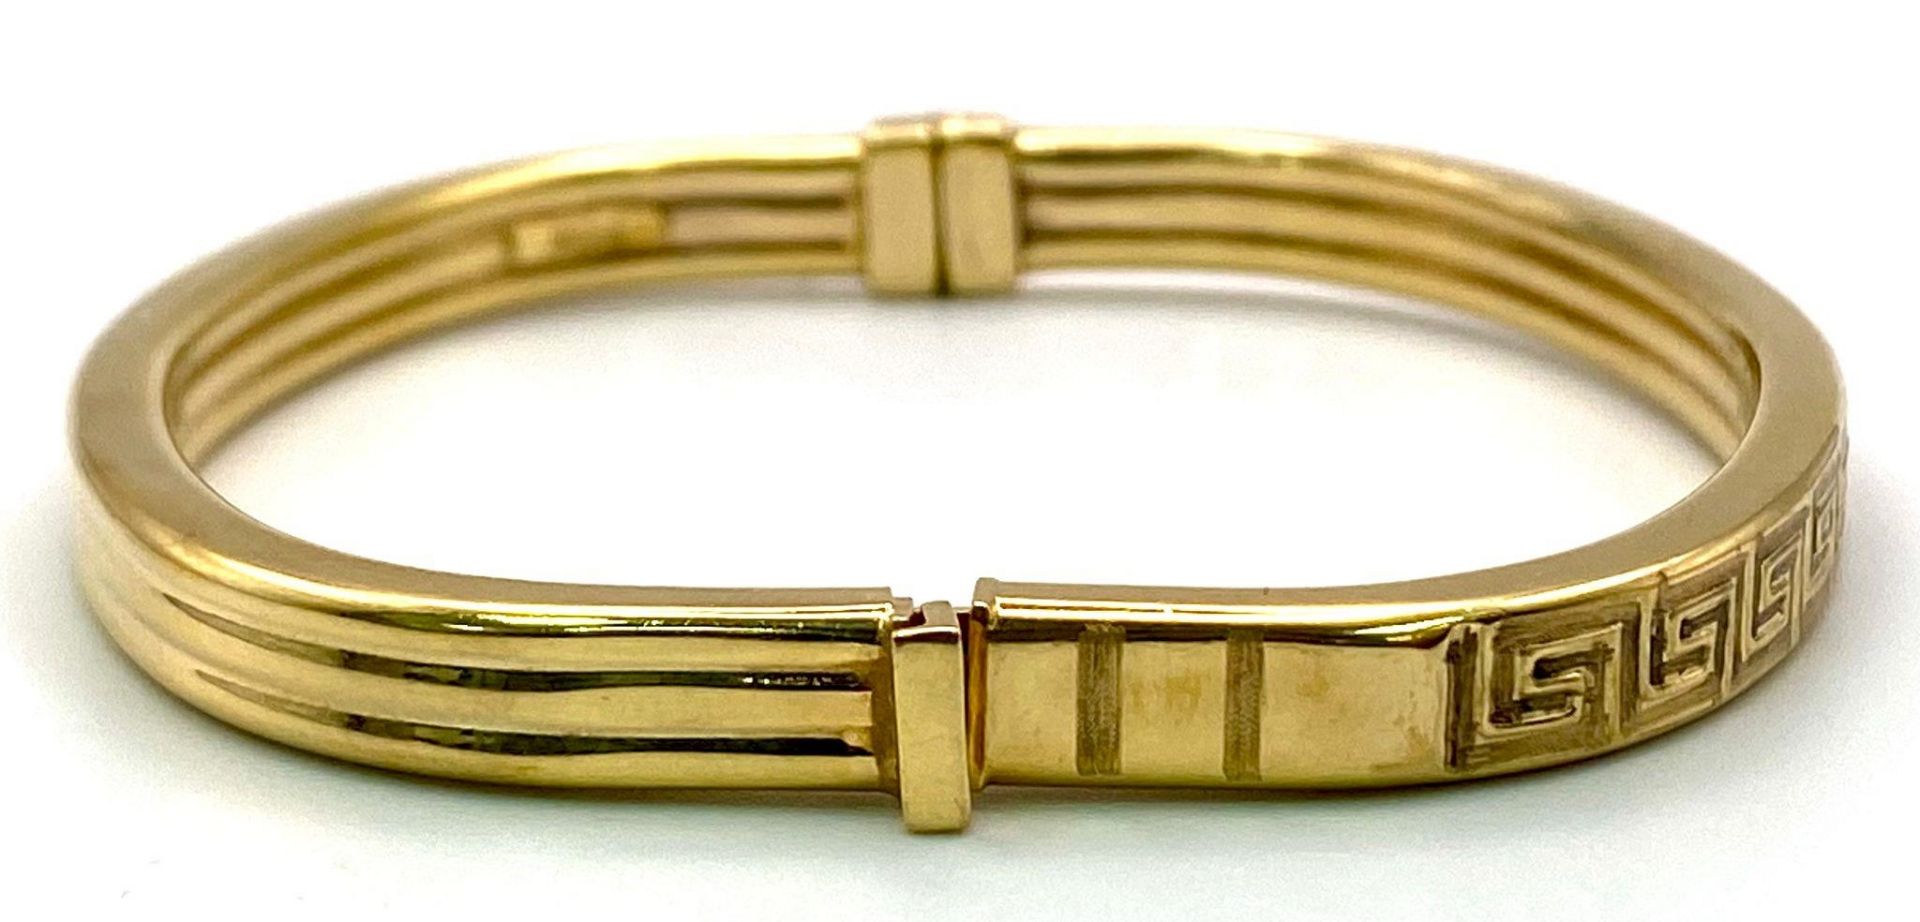 A 9K GOLD ITALIAN DESIGNER HINGED BANGLE WITH GREEK PATTERN ON ONE SIDE . 10.2gms - Image 2 of 5